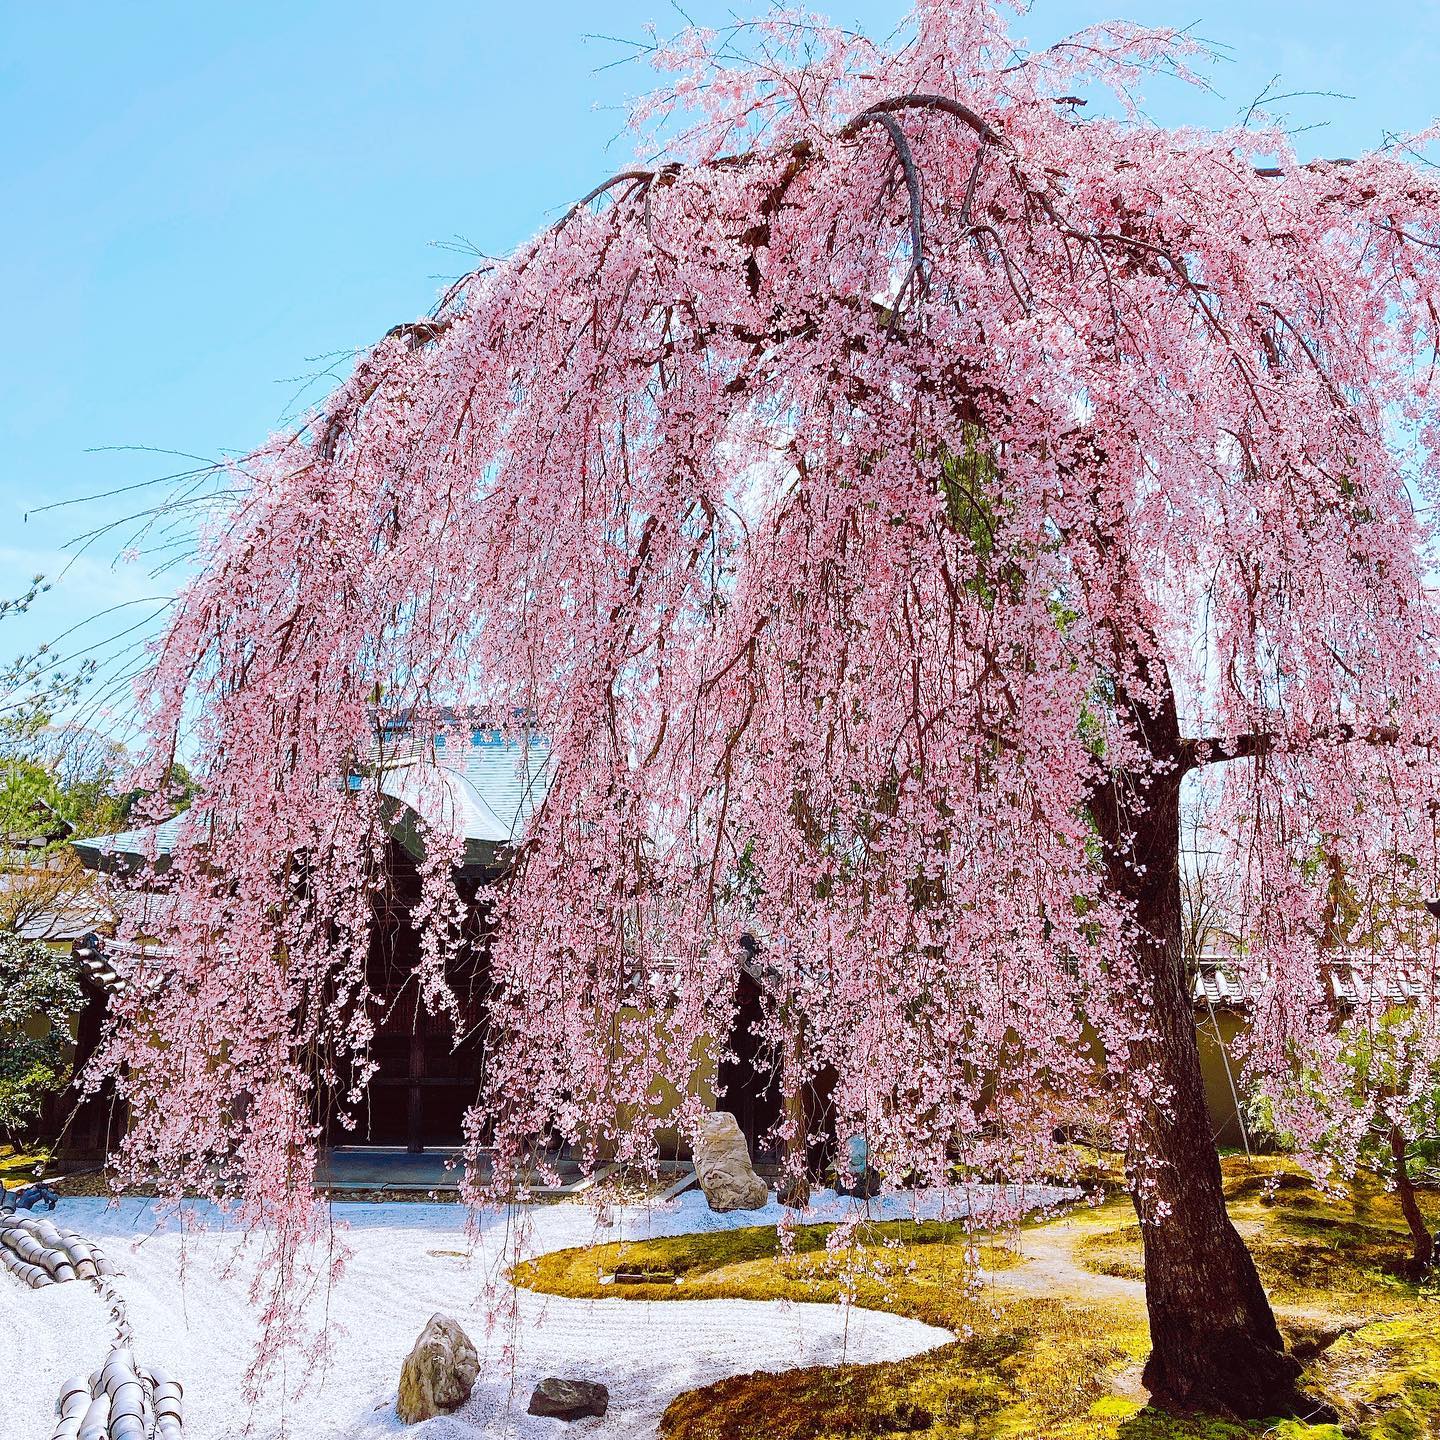 Cherry Blossoms in Japan - Maruyama Park weeping tree